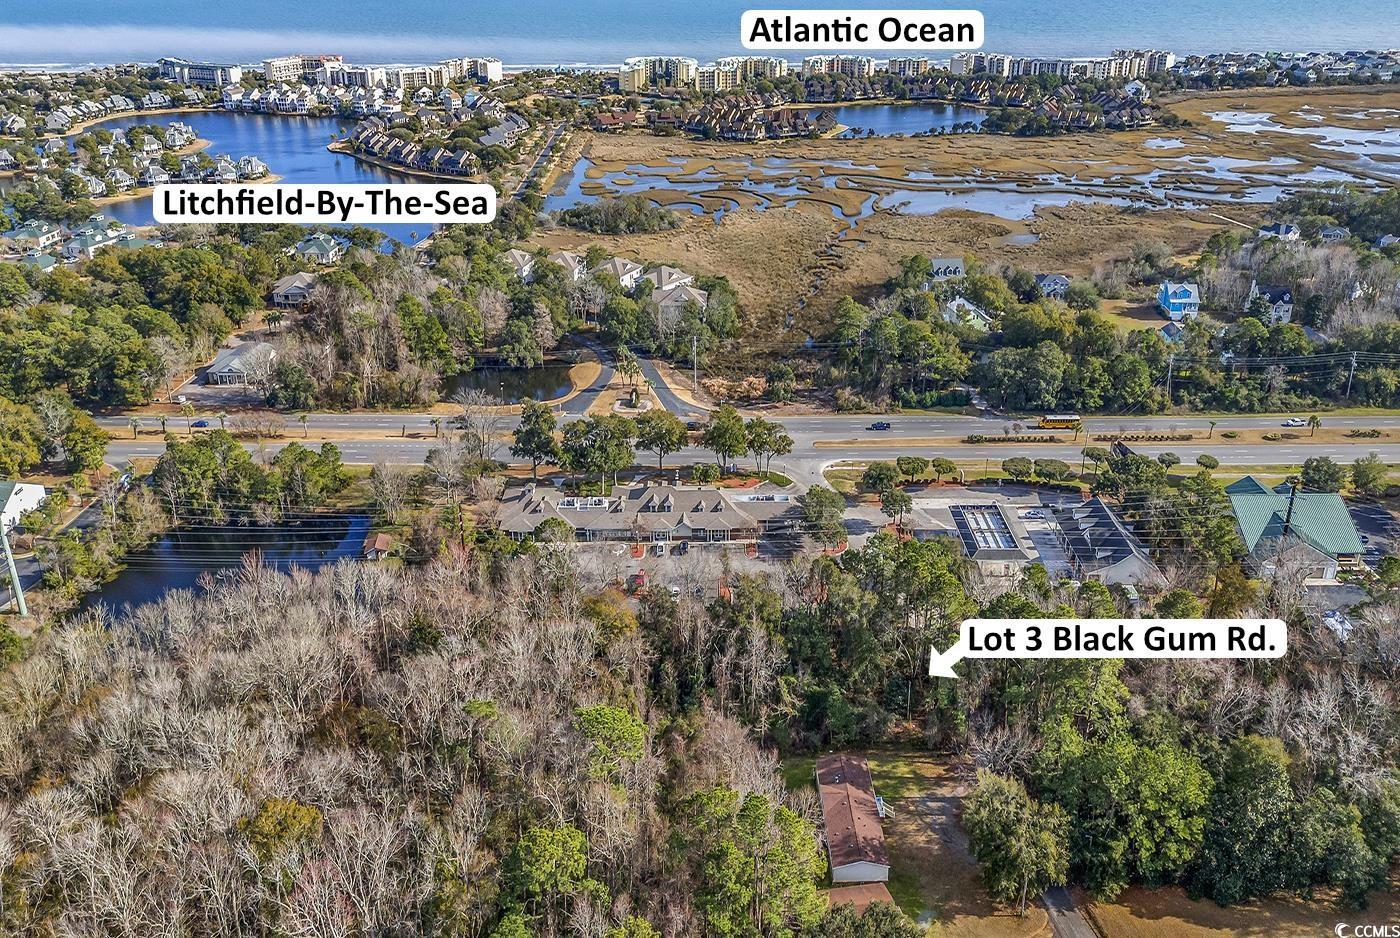 highly sought-after acreage, with no hoa fees, the parcel uniquely located within close proximity to litchfield-by-the-sea and litchfield beaches. this large lot provides ample opportunity for development or the building of your dream home on a large homestead! with so few vacant properties available in pawleys island, this lot will certainly capture quite a bit of attention. there is currently a project underway to drain the mingo pond which is adjacent to the lot. perfectly situated near the shops at litchfield market village, the lot’s location is convenient to all this beautiful area has to offer including: legendary golf courses, an abundance of incredible restaurants, unique shops and a large selection of water/leisure activities including boating/fishing in both fresh & saltwater ~ as well as miles of gorgeous ocean beach to explore and enjoy!